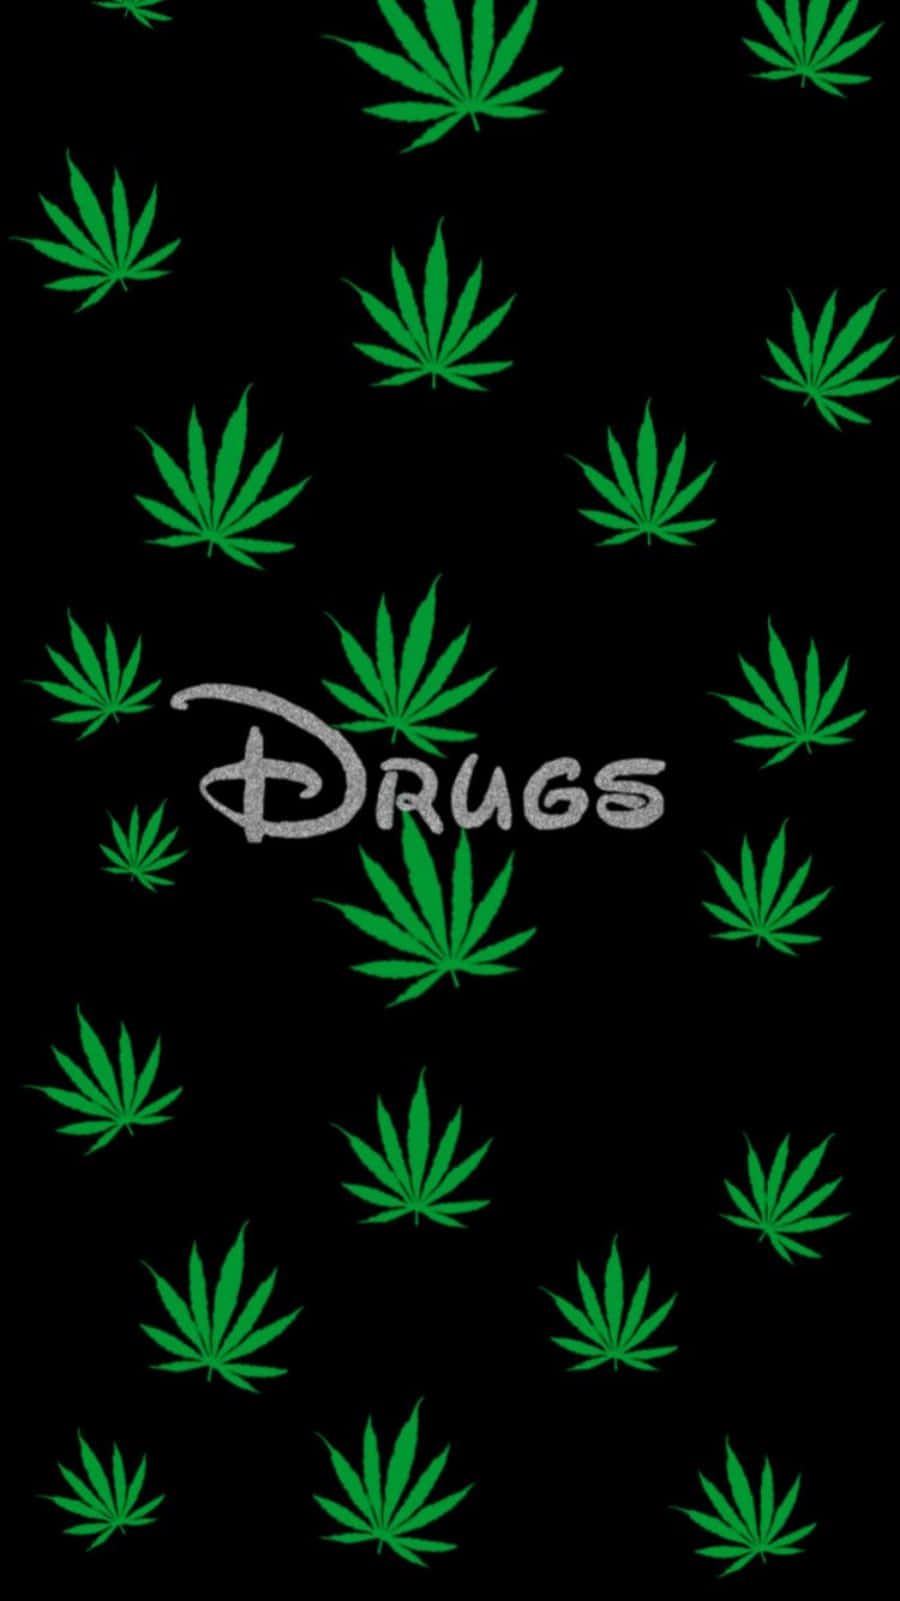 Get your Shit, Dope, and Weed needs all in one convenient location! Wallpaper